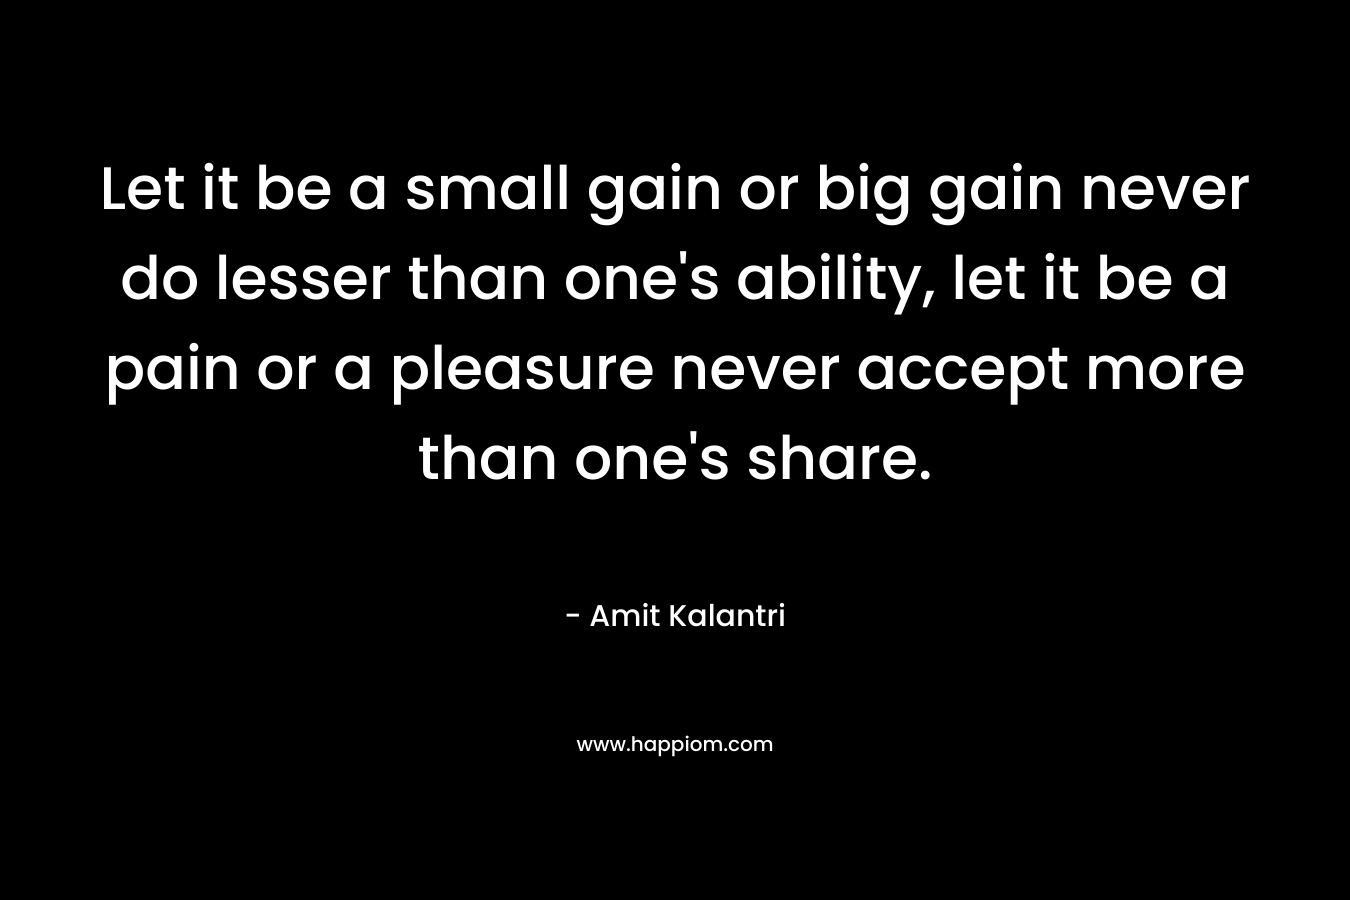 Let it be a small gain or big gain never do lesser than one's ability, let it be a pain or a pleasure never accept more than one's share.